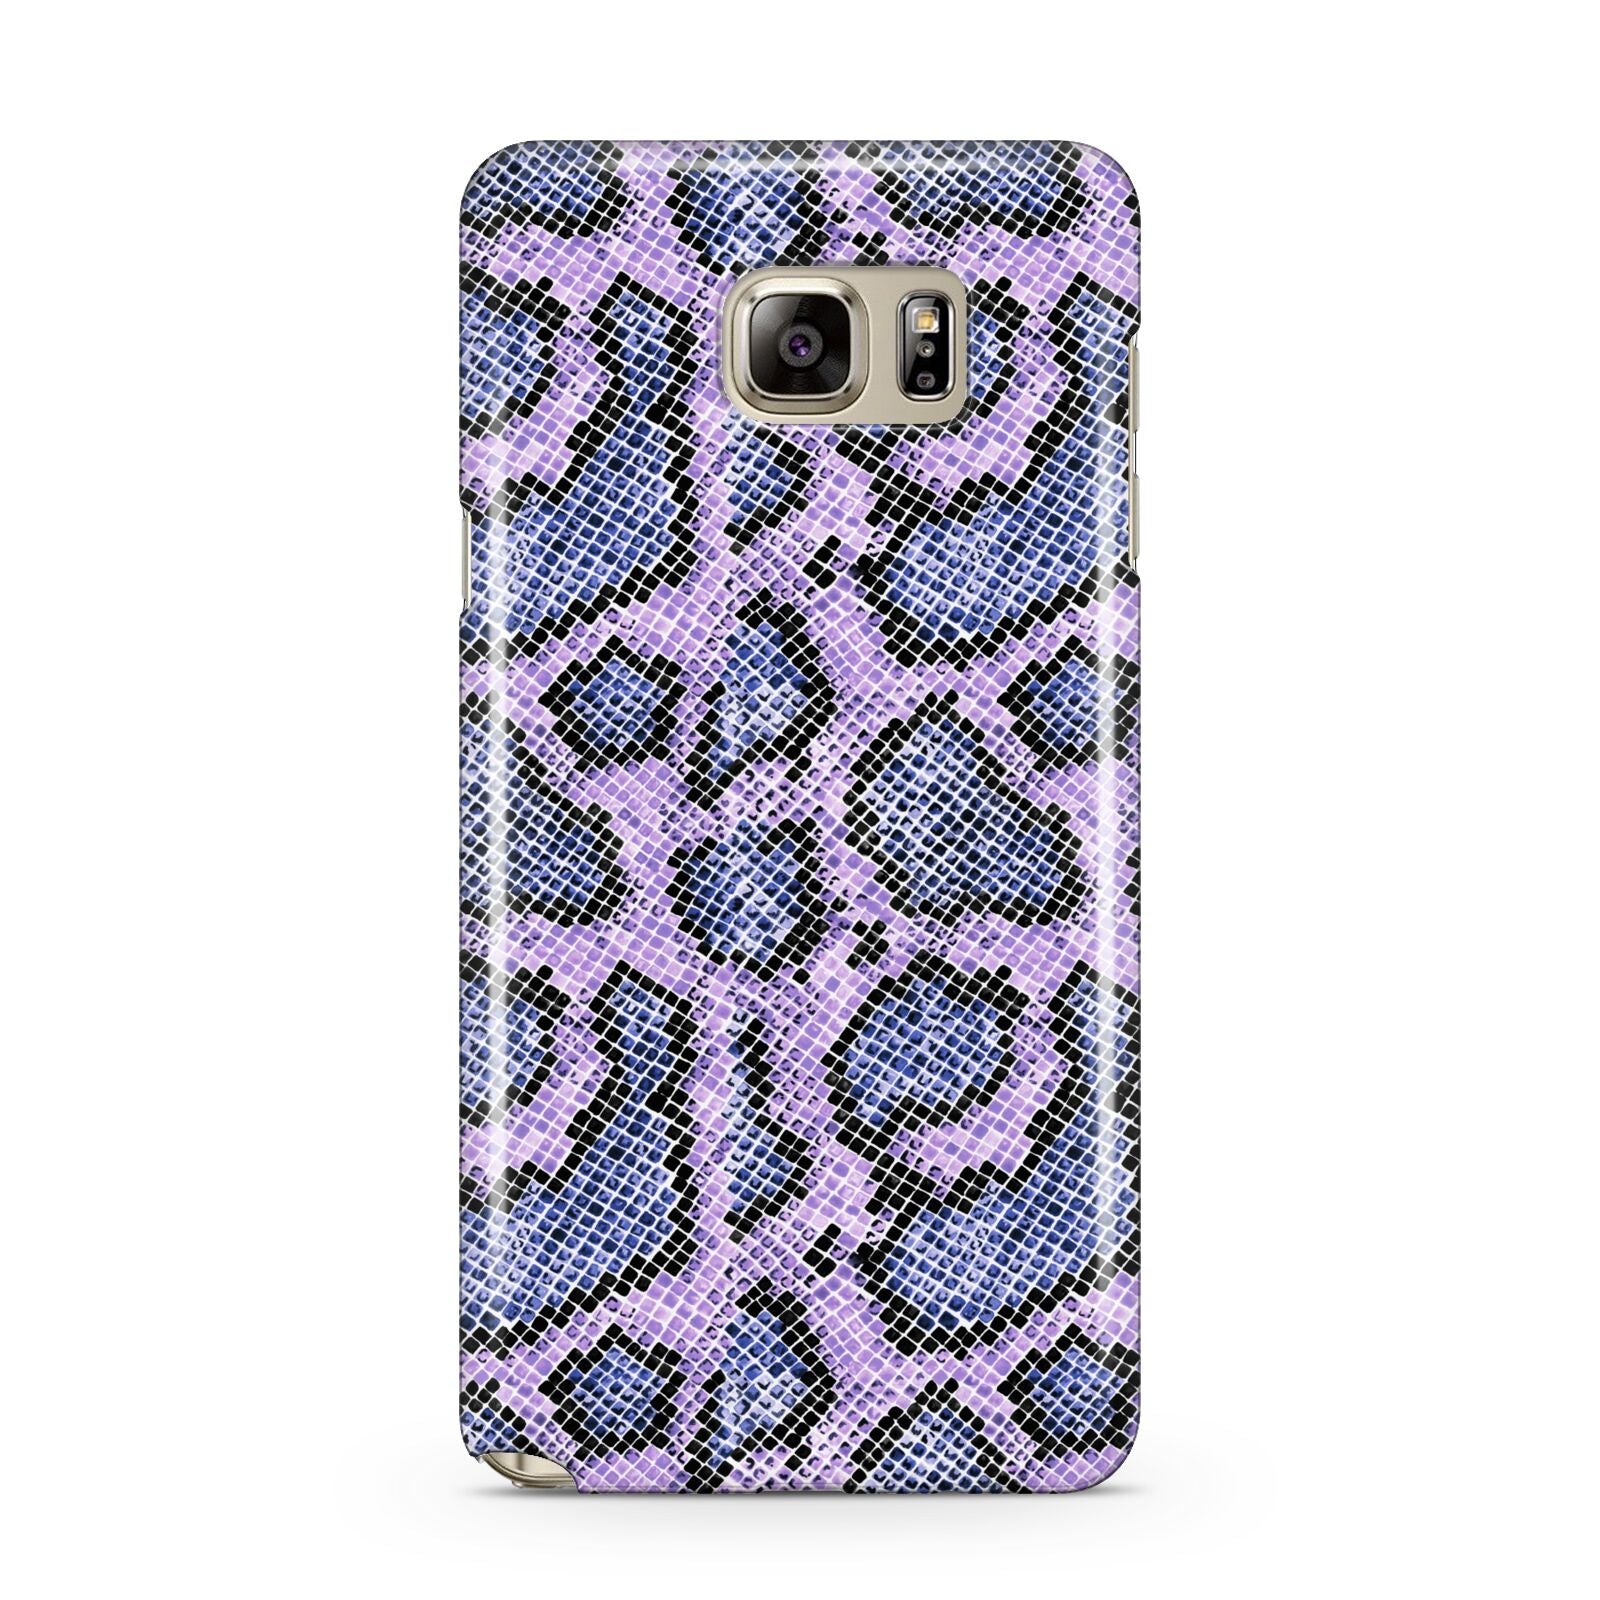 Purple And Blue Snakeskin Samsung Galaxy Note 5 Case